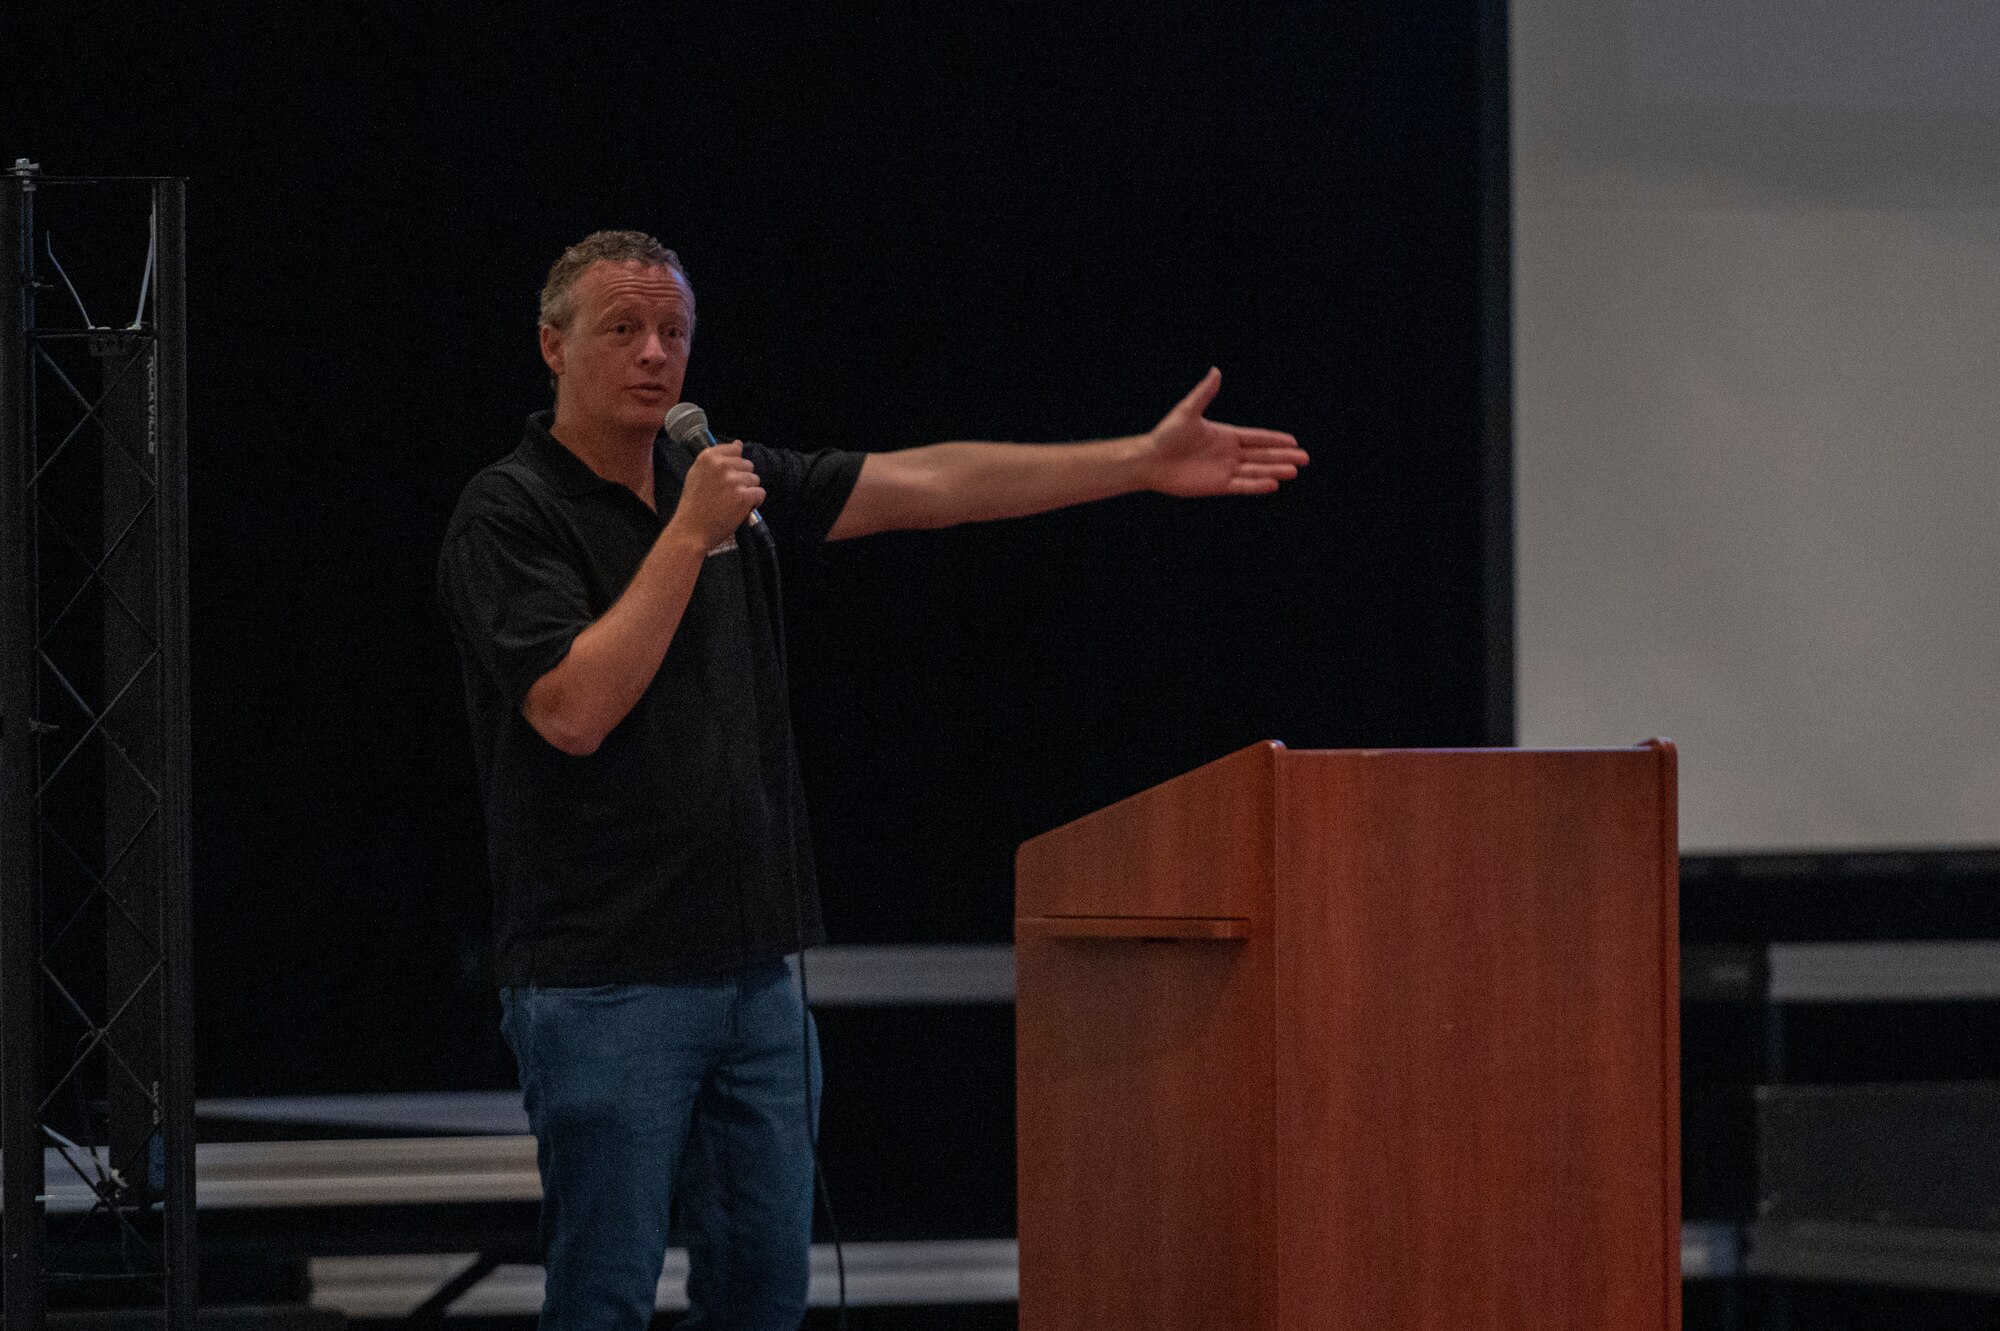 Jake Rademacher, director of the movie Brothers at War, speaks to Airmen of the 167th Airlift Wing and their family members during the Brothers at War Resiliency Workshop held at Martinsburg High School, Martinsburg, West Virginia, September 11, 2022.